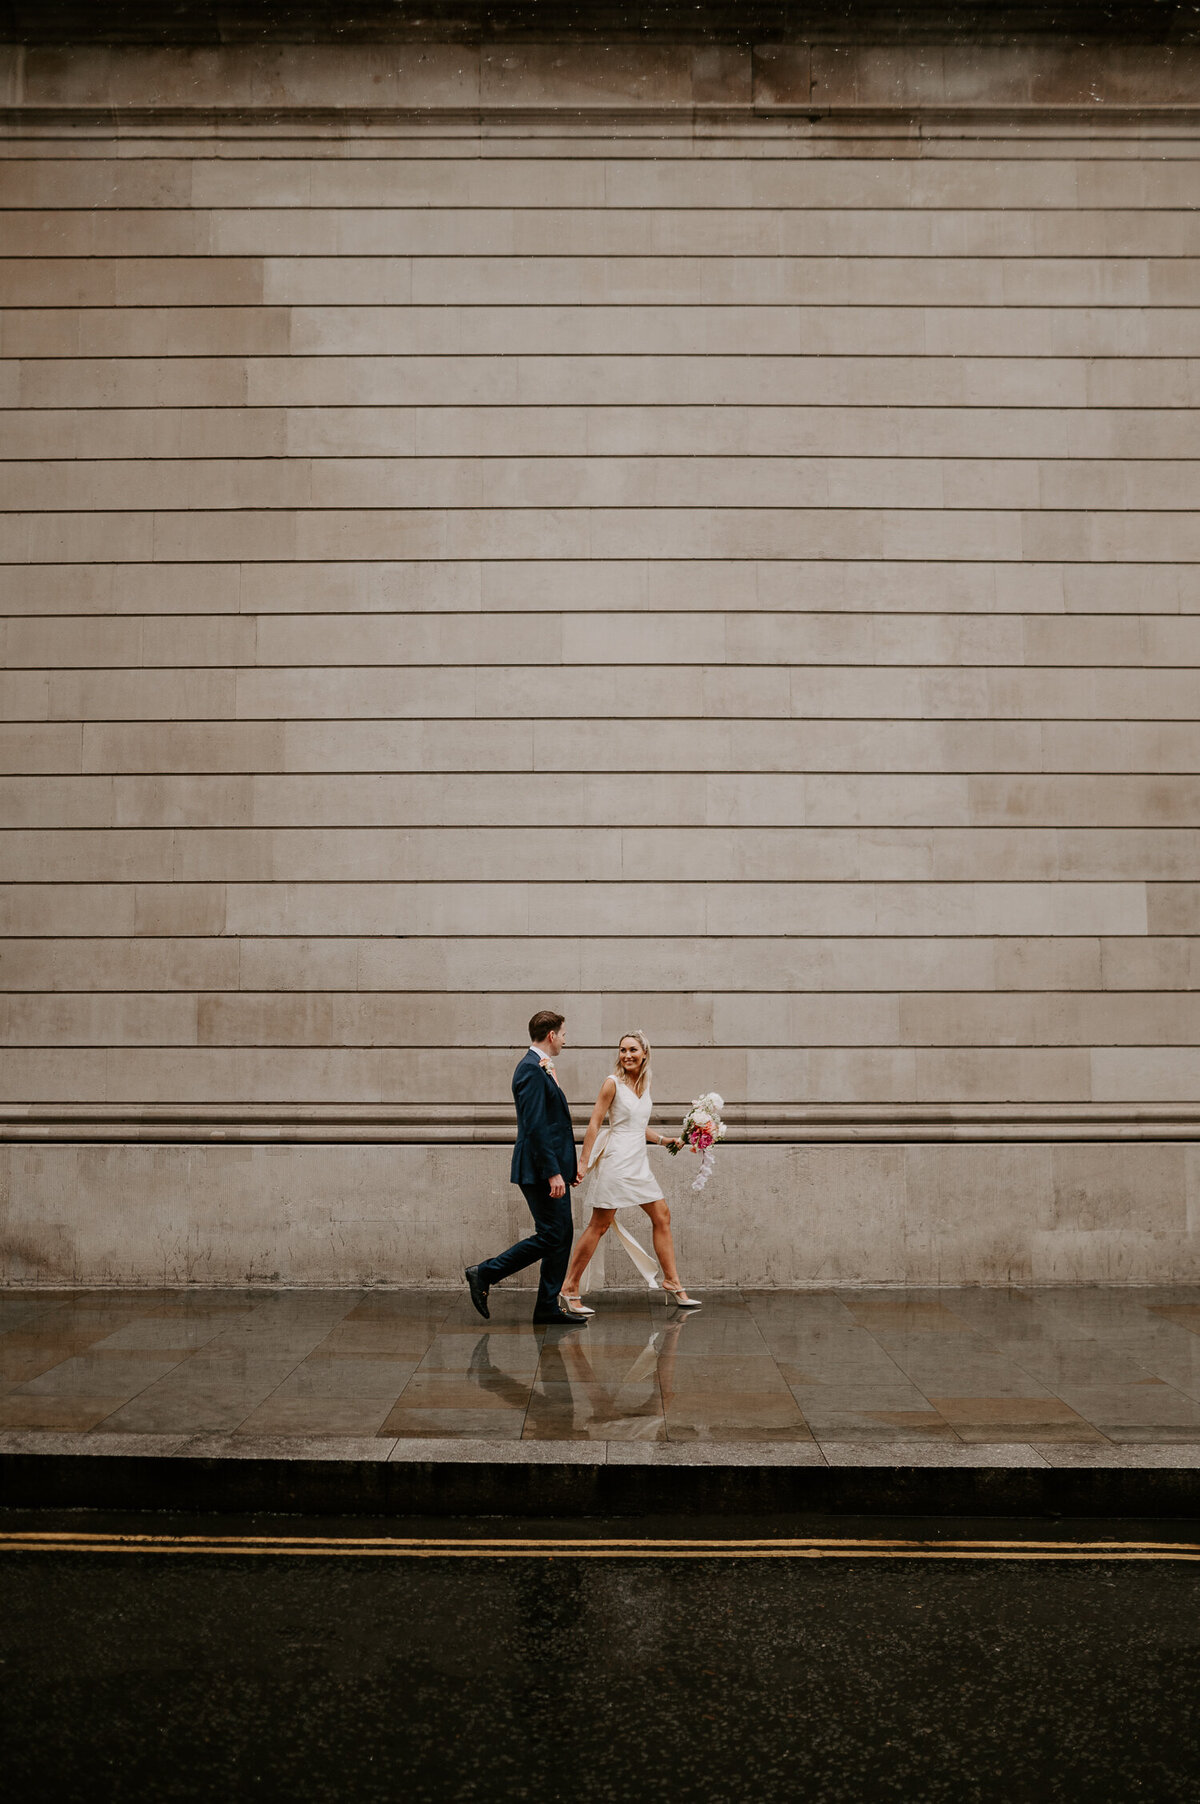 A wedding couple walk through Bank in London near the Ned, the Bride is wearing a short wedding dress and carrying a pink bouquet.